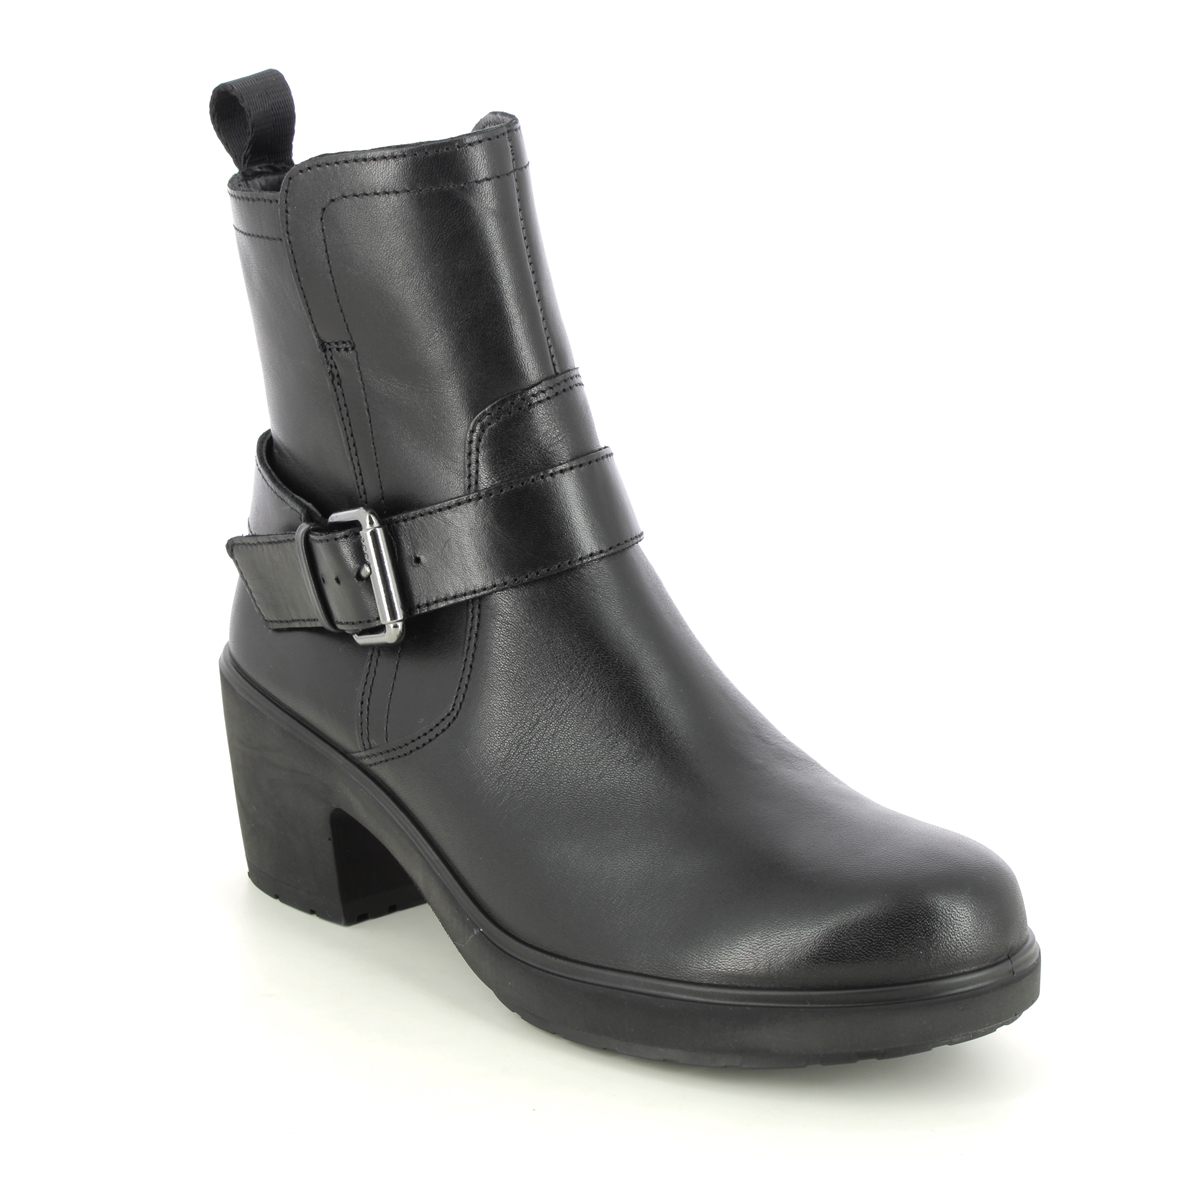 Ecco Zurich Tex Metropole Black Leather Womens Ankle Boots 222203-01001 In Size 39 In Plain Black Leather